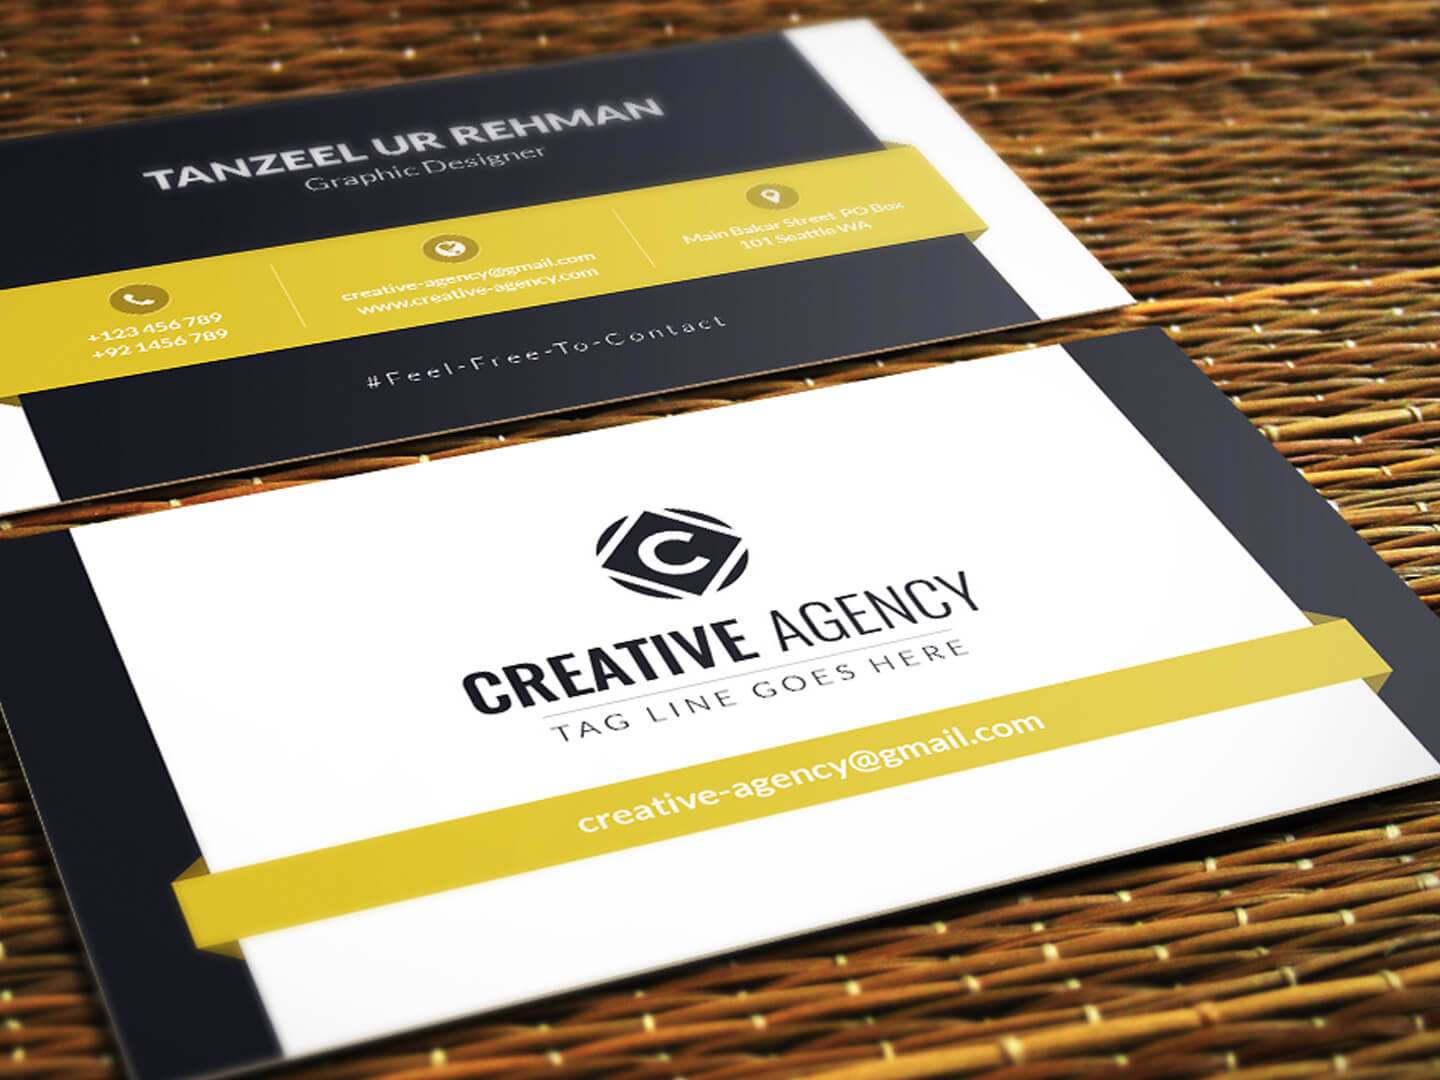 Business Cards Template – Free Downloadtanzeel Ur Rehman Inside Templates For Visiting Cards Free Downloads